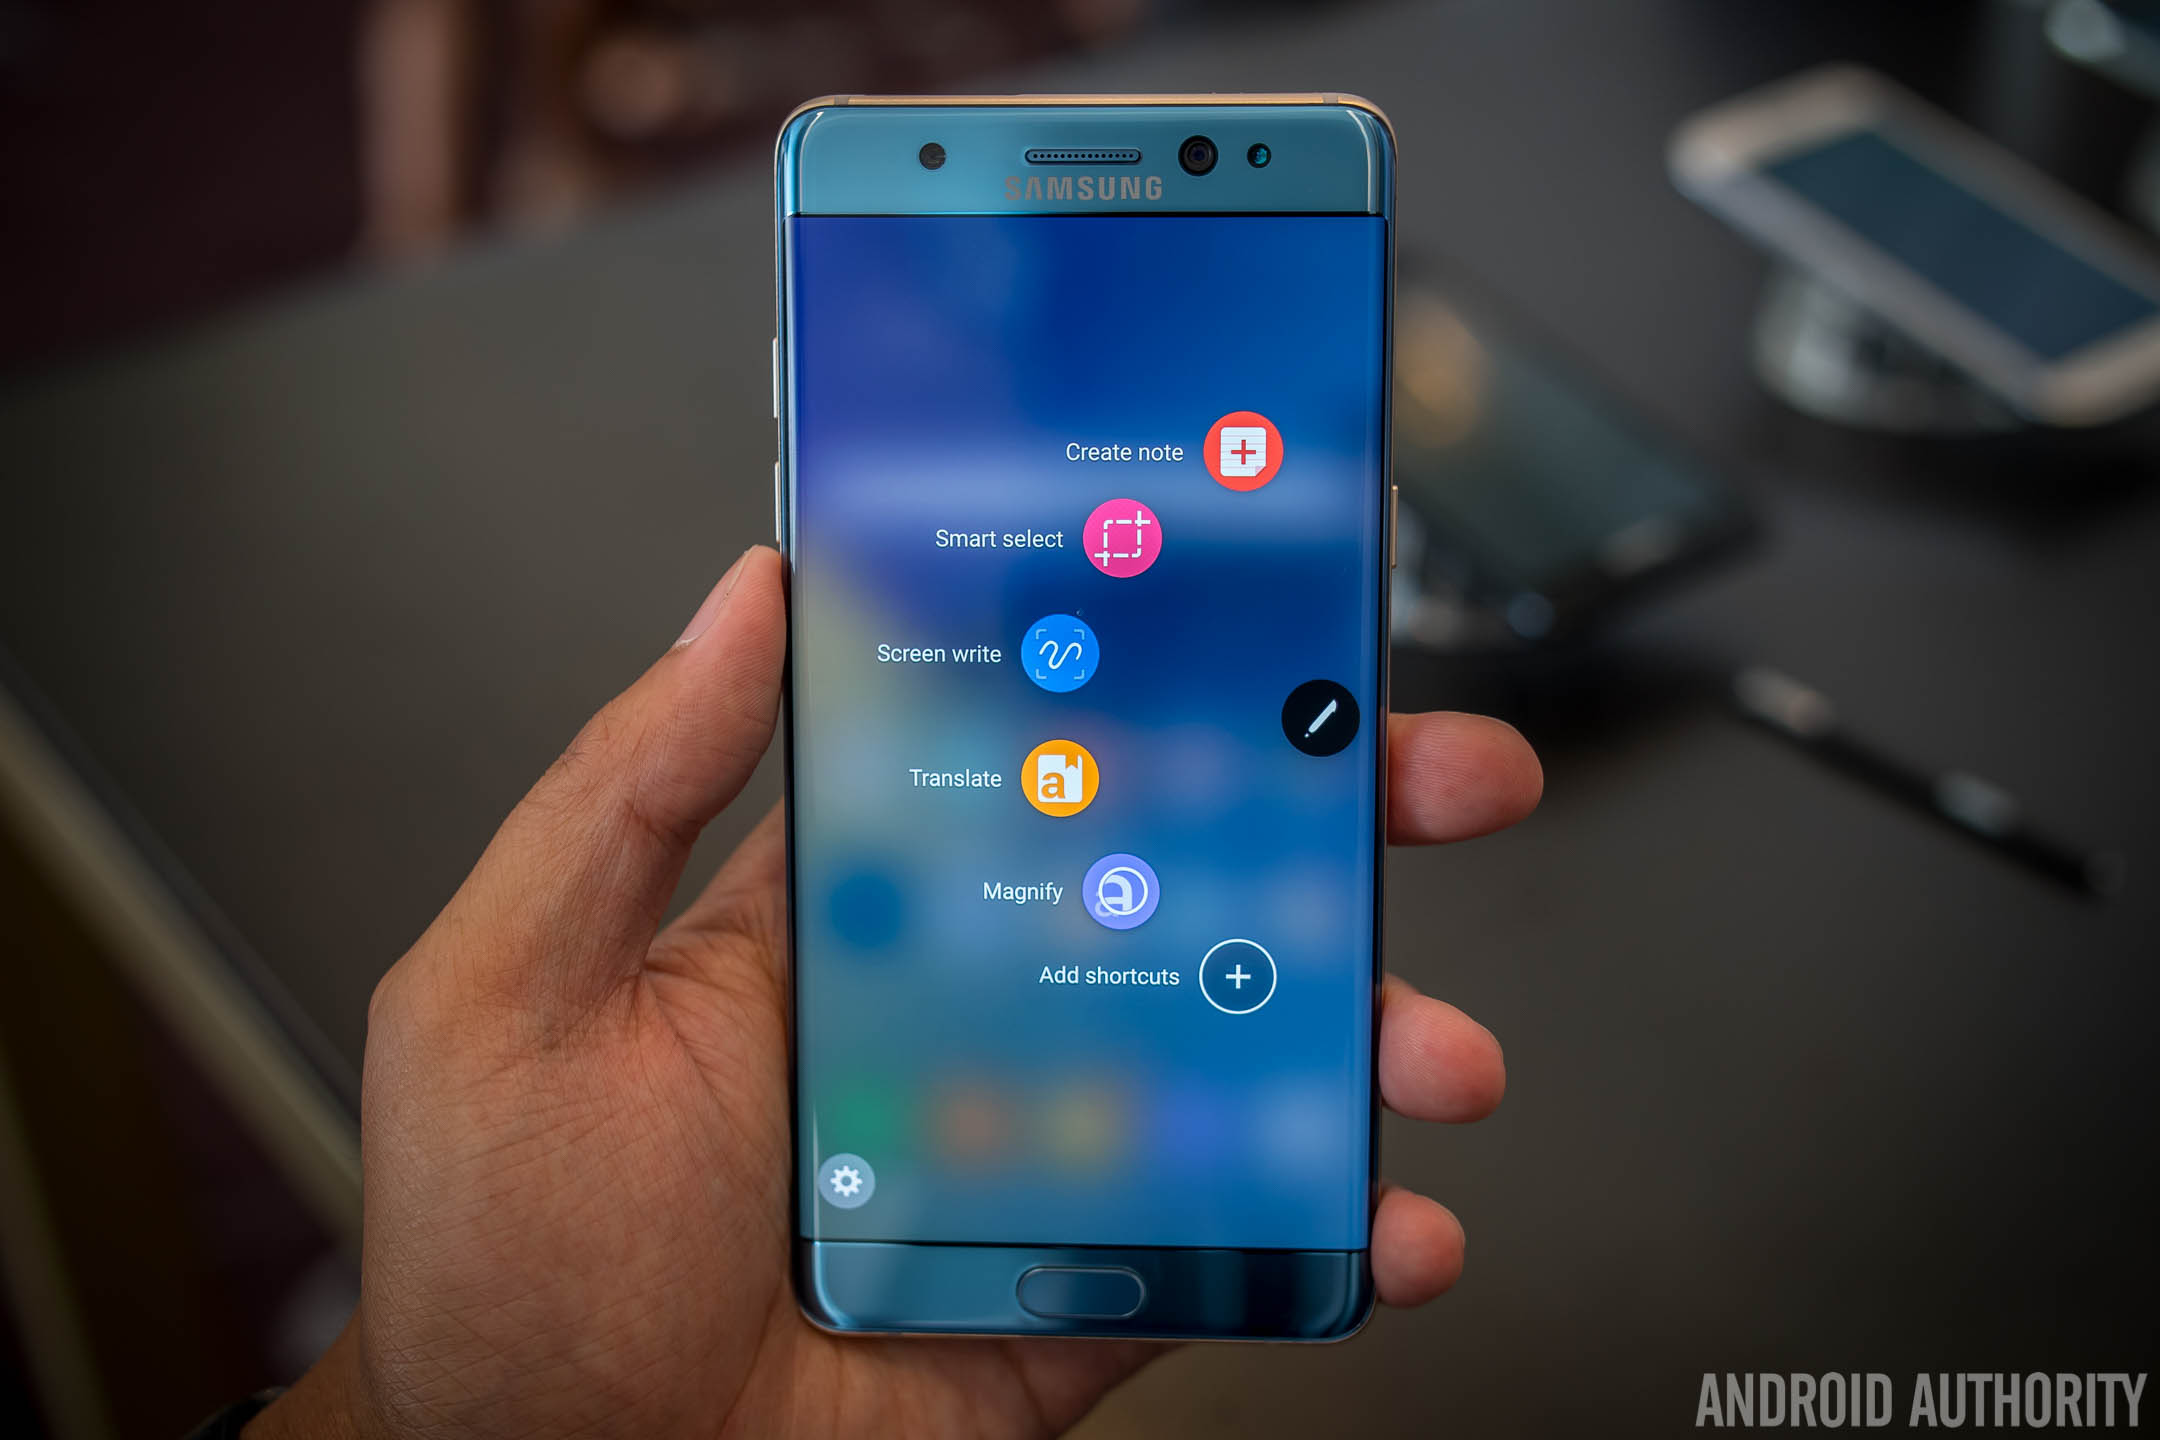 Samsung-Galaxy-Note-7-hands-on-first-batch-AA-(30-of-47)